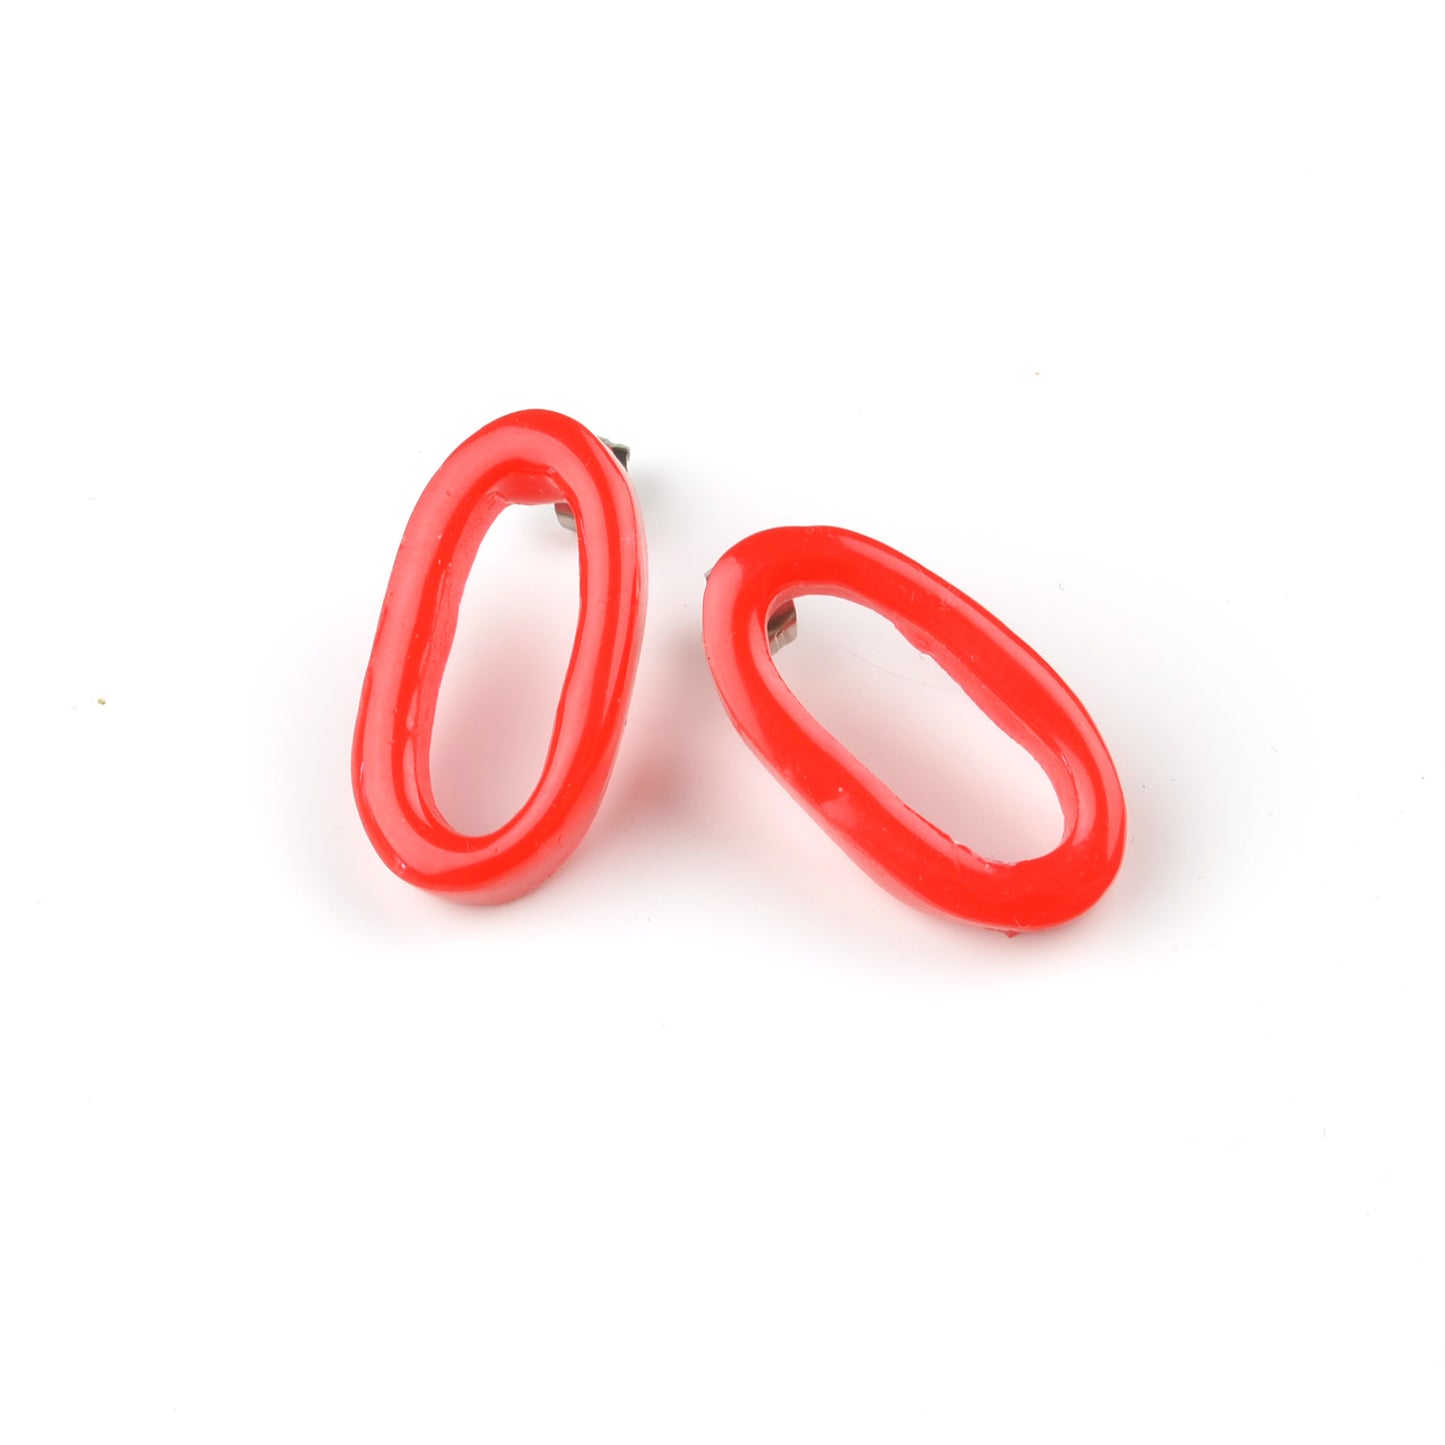 Little Long Link Studs-Bright Red